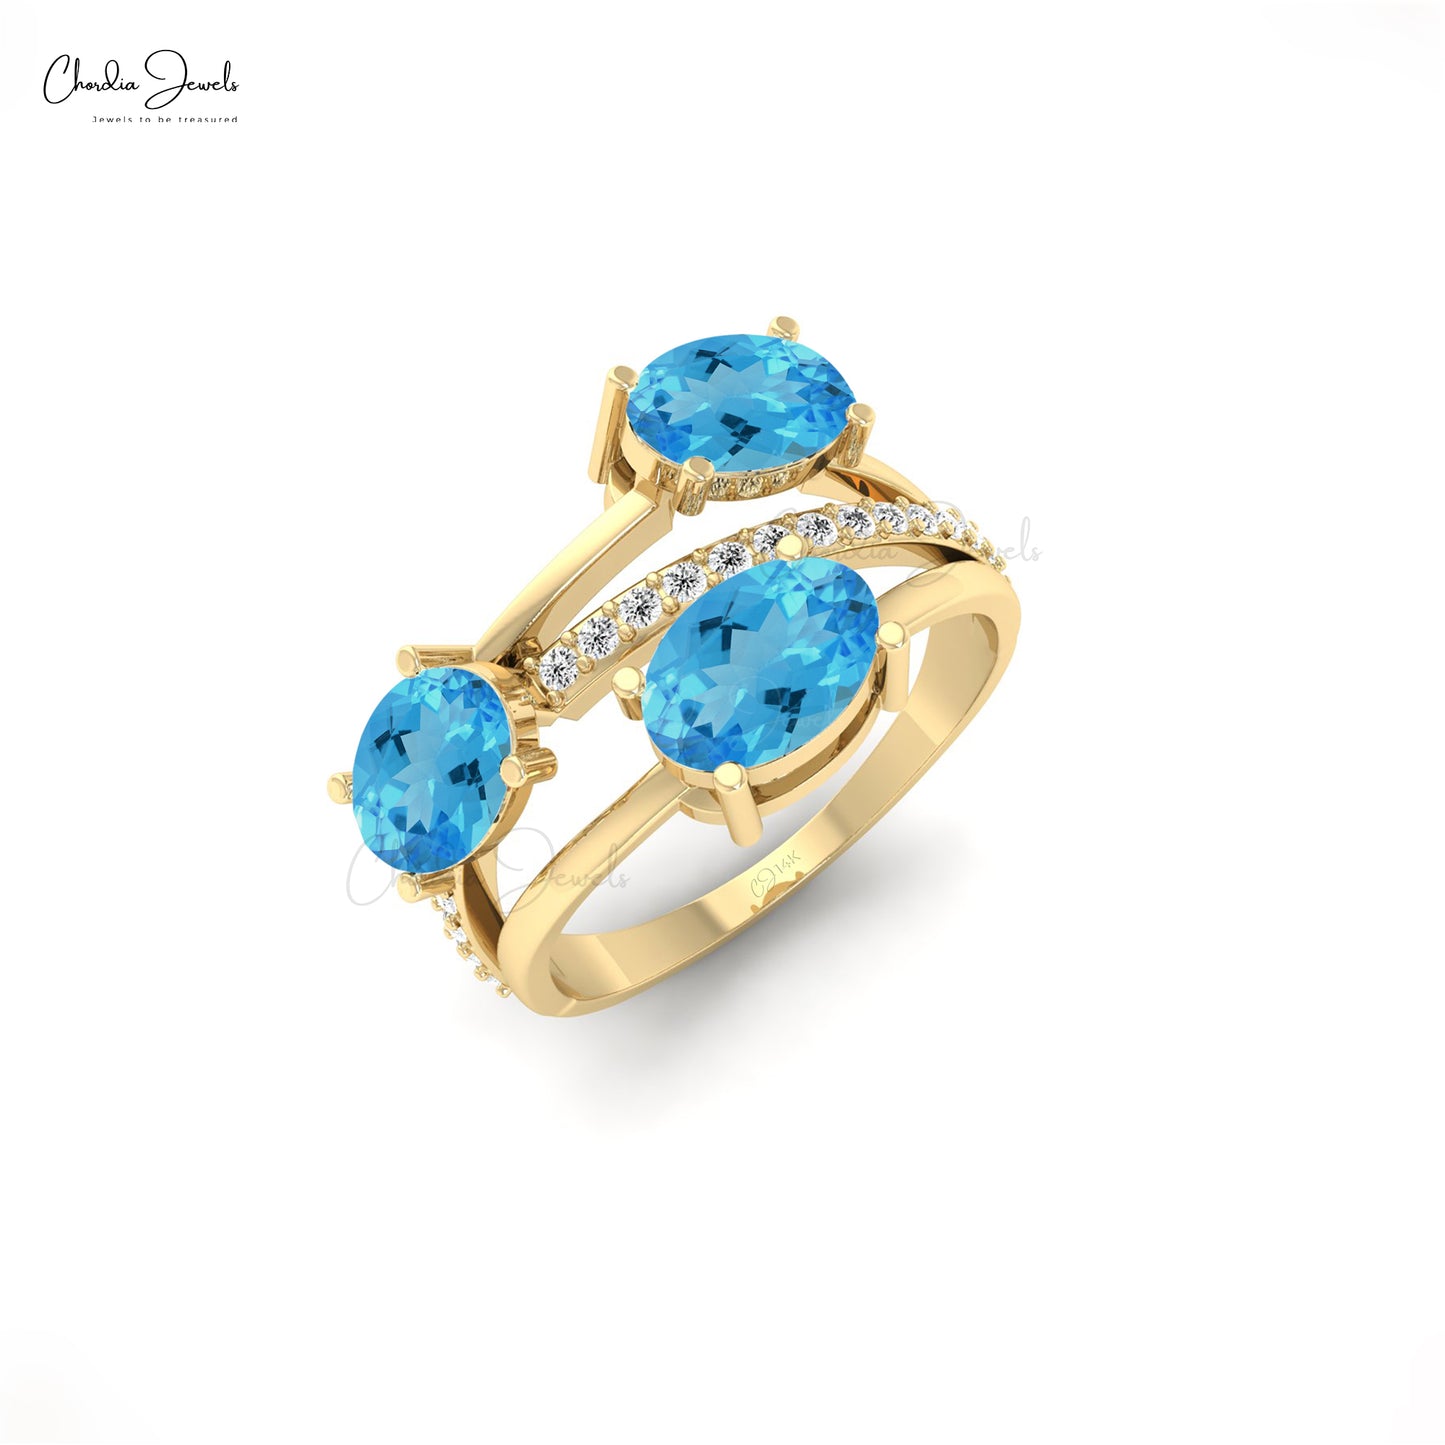 Swiss Blue Topaz Split Shank Ring with Diamonds Accent 14k Gold Crossover Ring For Women